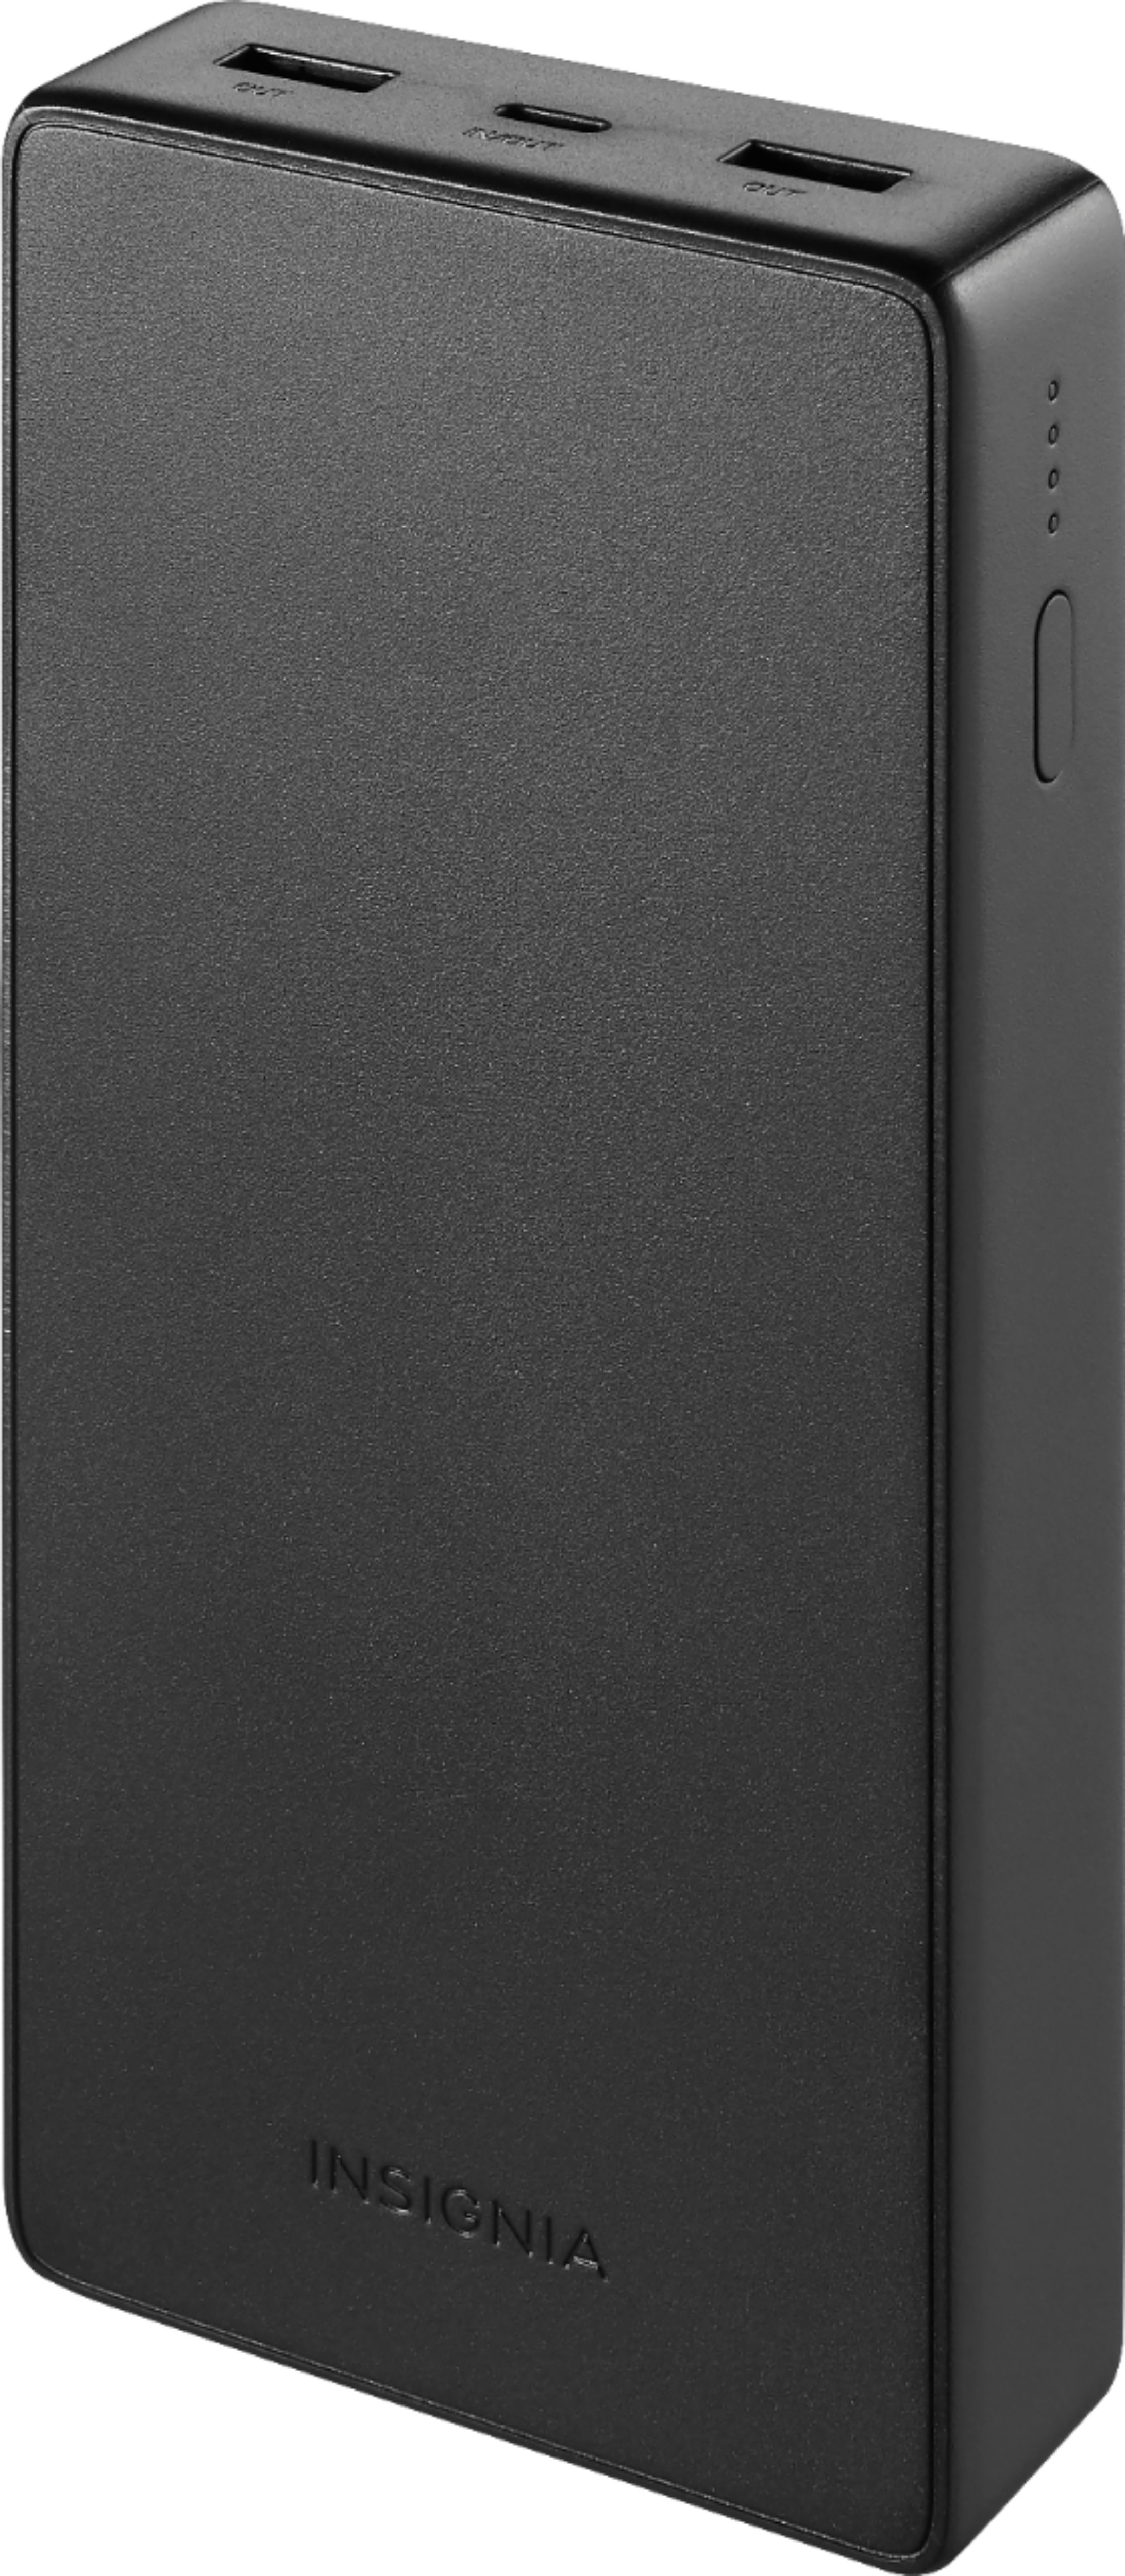 Angle View: Insignia™ - 20,000 mAh Portable Charger for Most USB Devices - Black